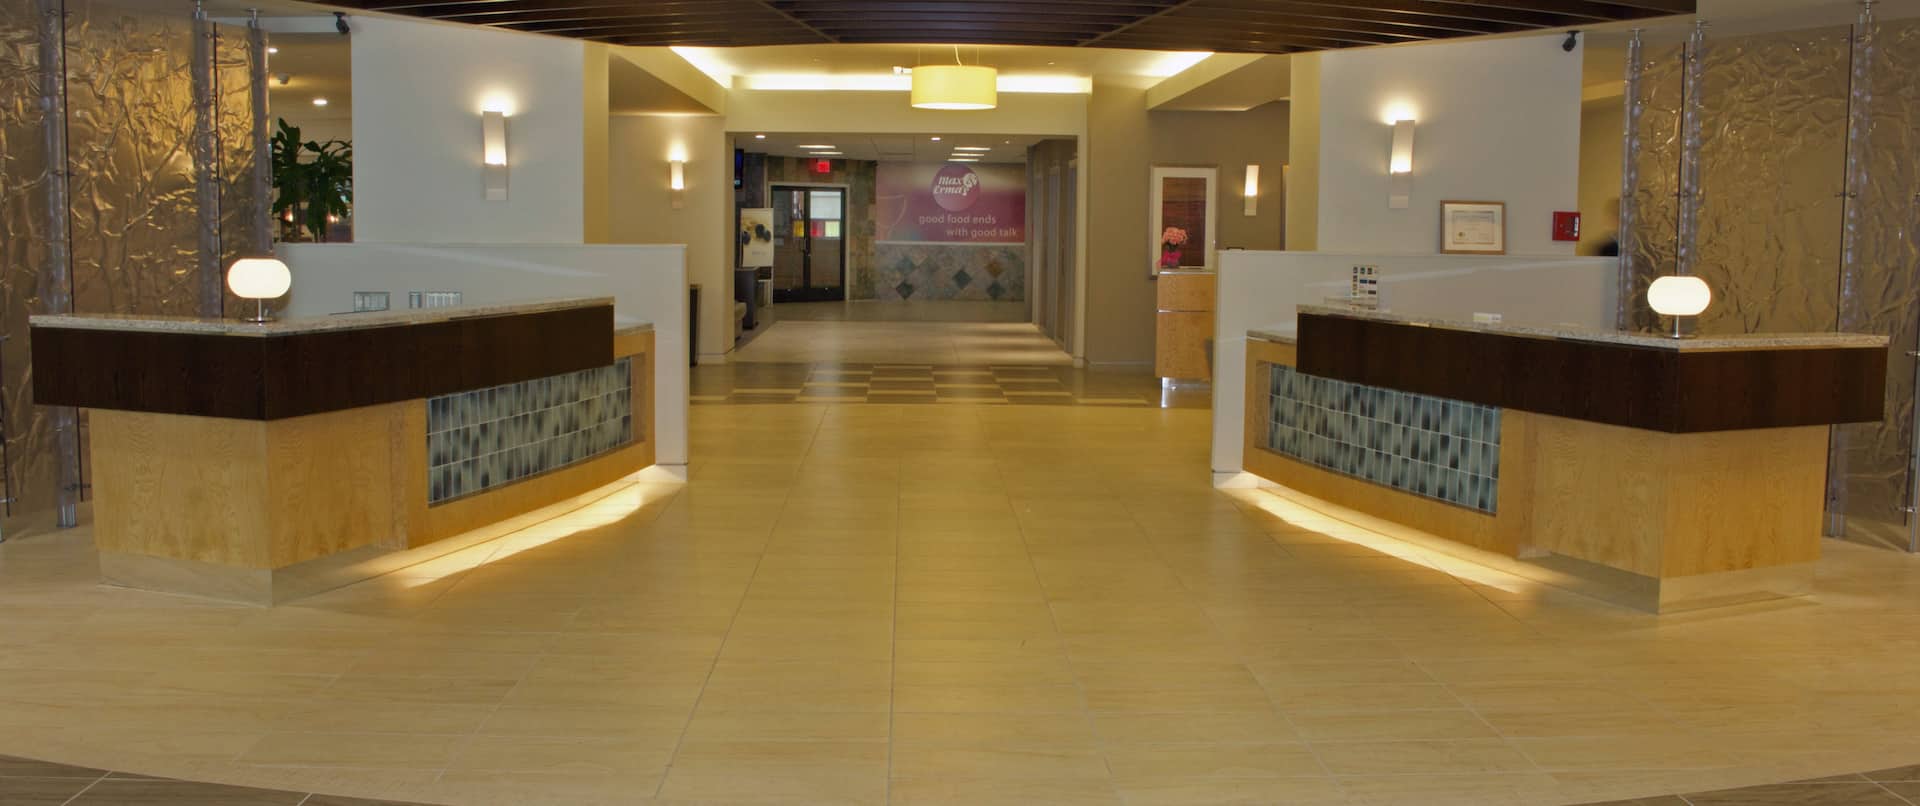 Reception Desks With Illuminated Lamps and View Down Lobby Corridor